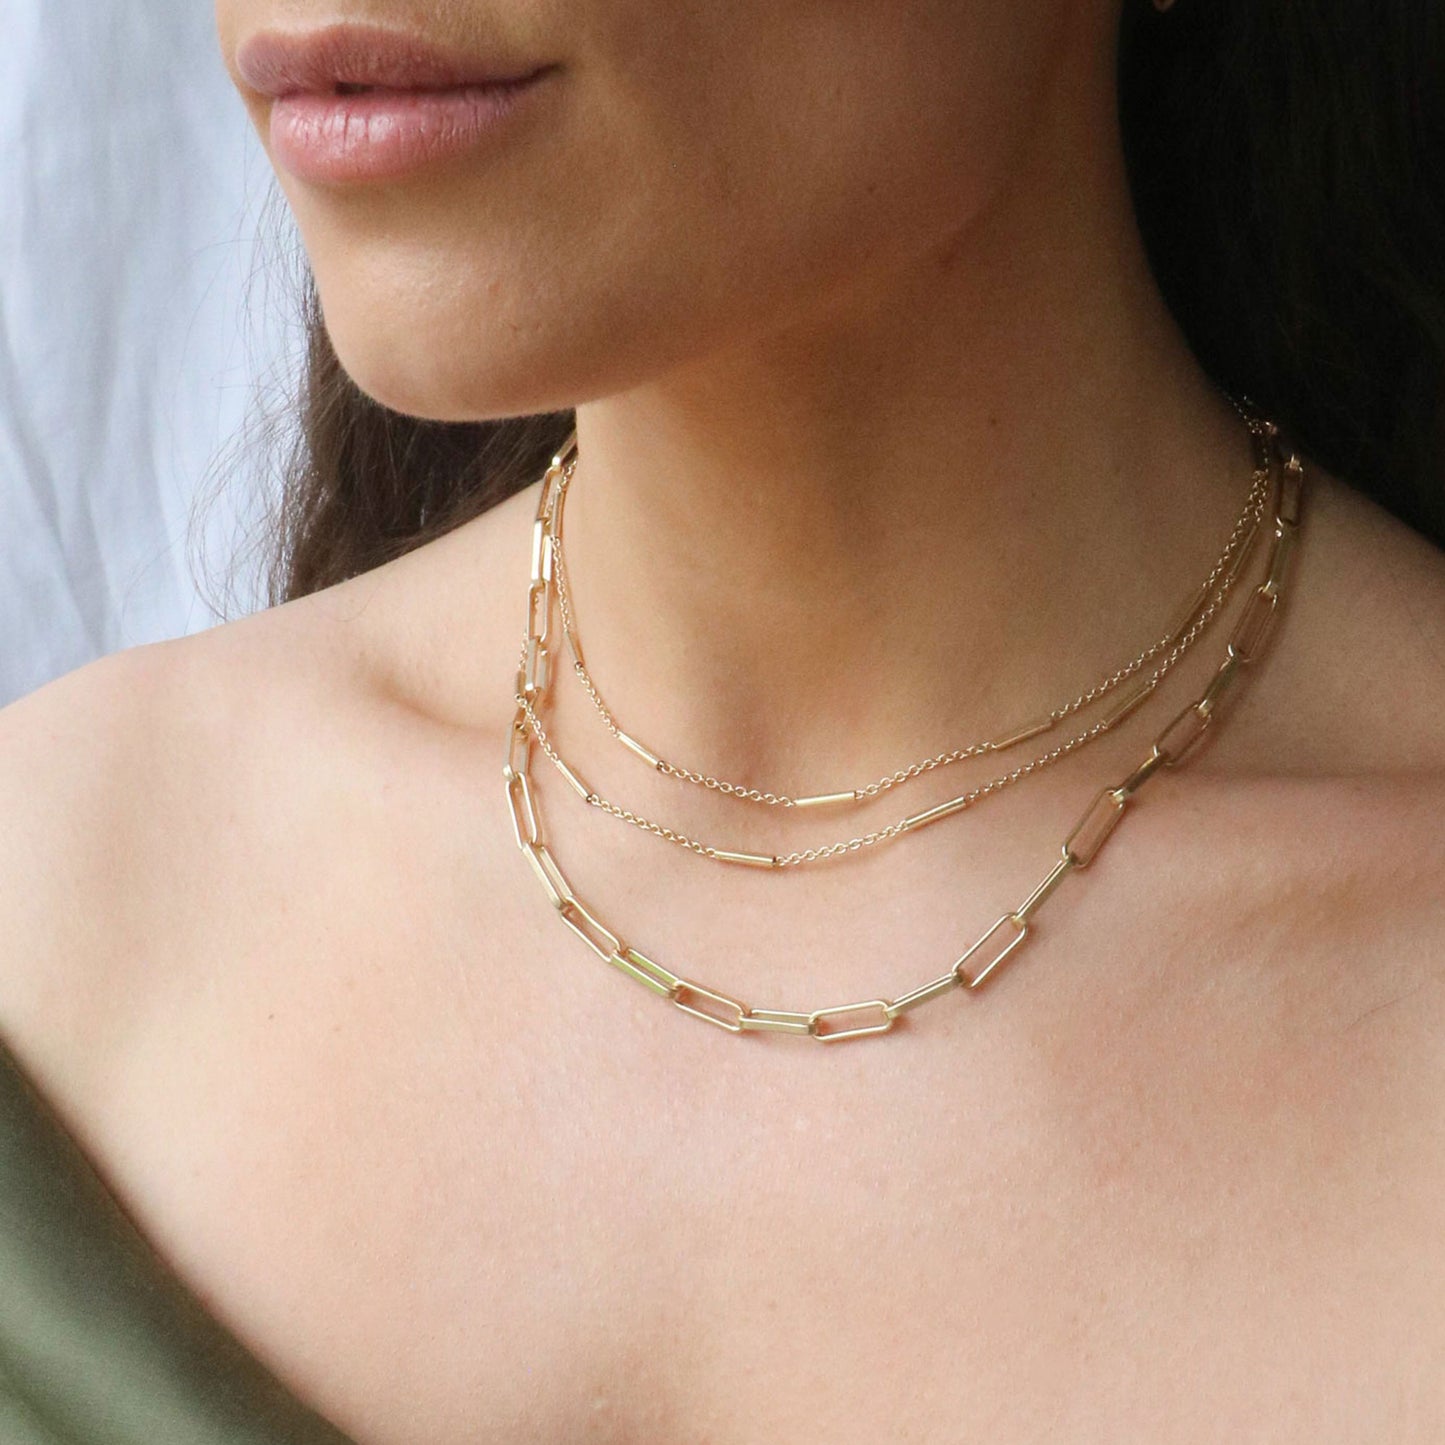 Triple strand gold plated necklace